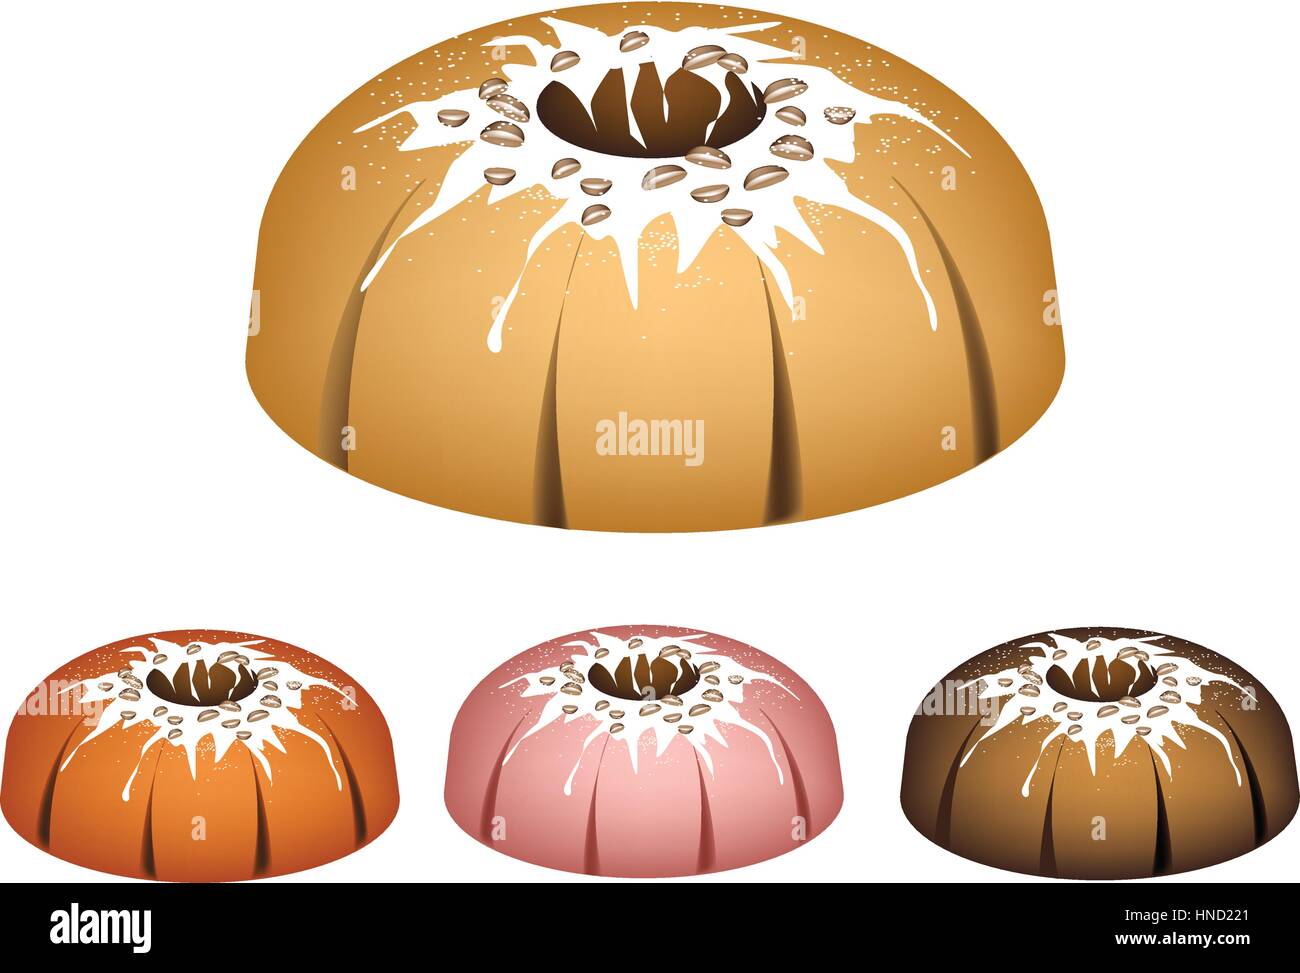 Illustration Set of Bundt Cake or Traditional Big Round Cake with Hole Inside, Mirror Glaze Coating and Chocolate Sprinkles for Holiday Dessert Isolat Stock Vector